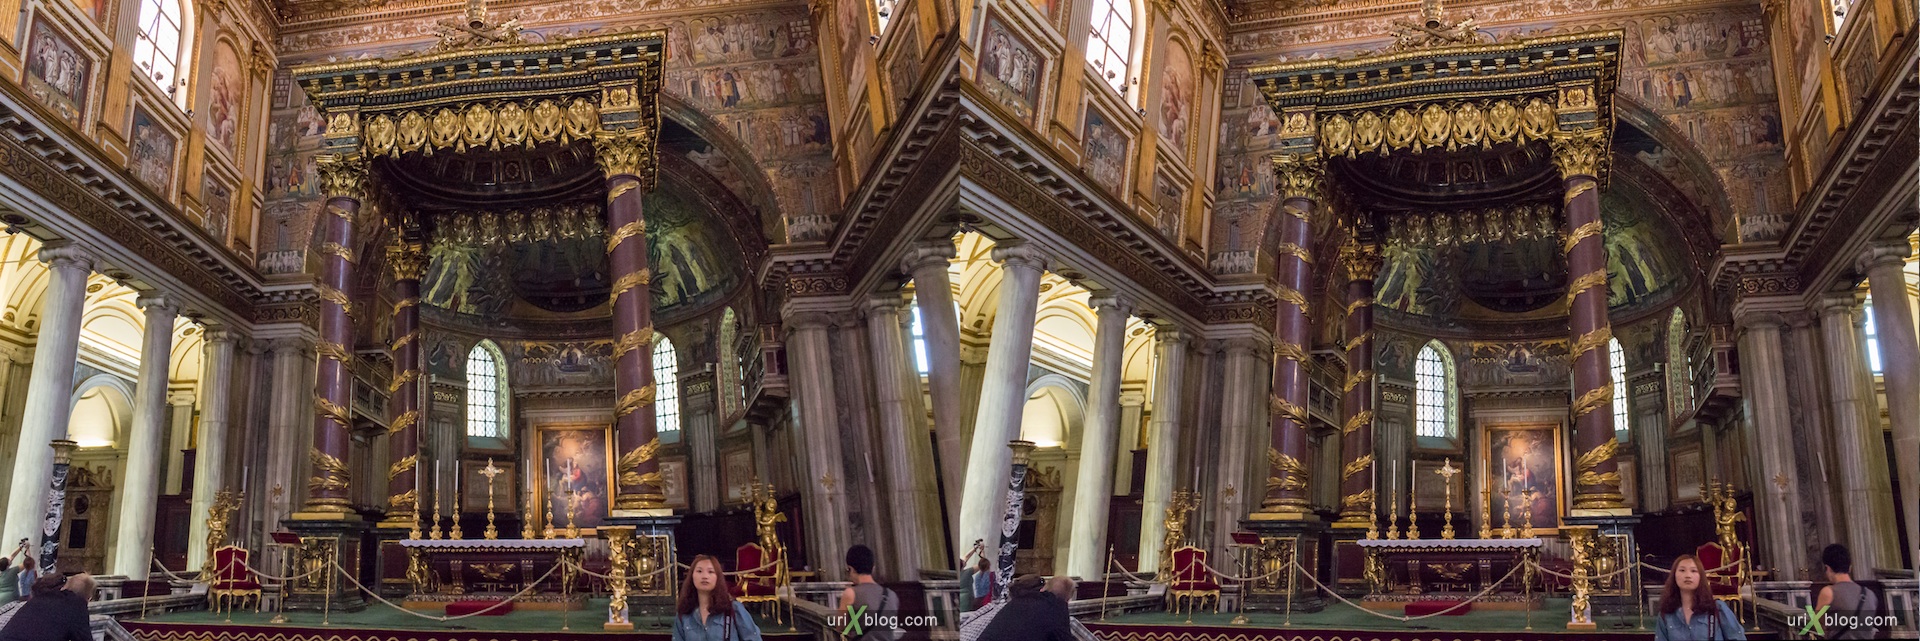 2012, basilica di Santa Maria Maggiore, church, Rome, Italy, cathedral, monastery, Christianity, Catholicism, 3D, stereo pair, cross-eyed, crossview, cross view stereo pair